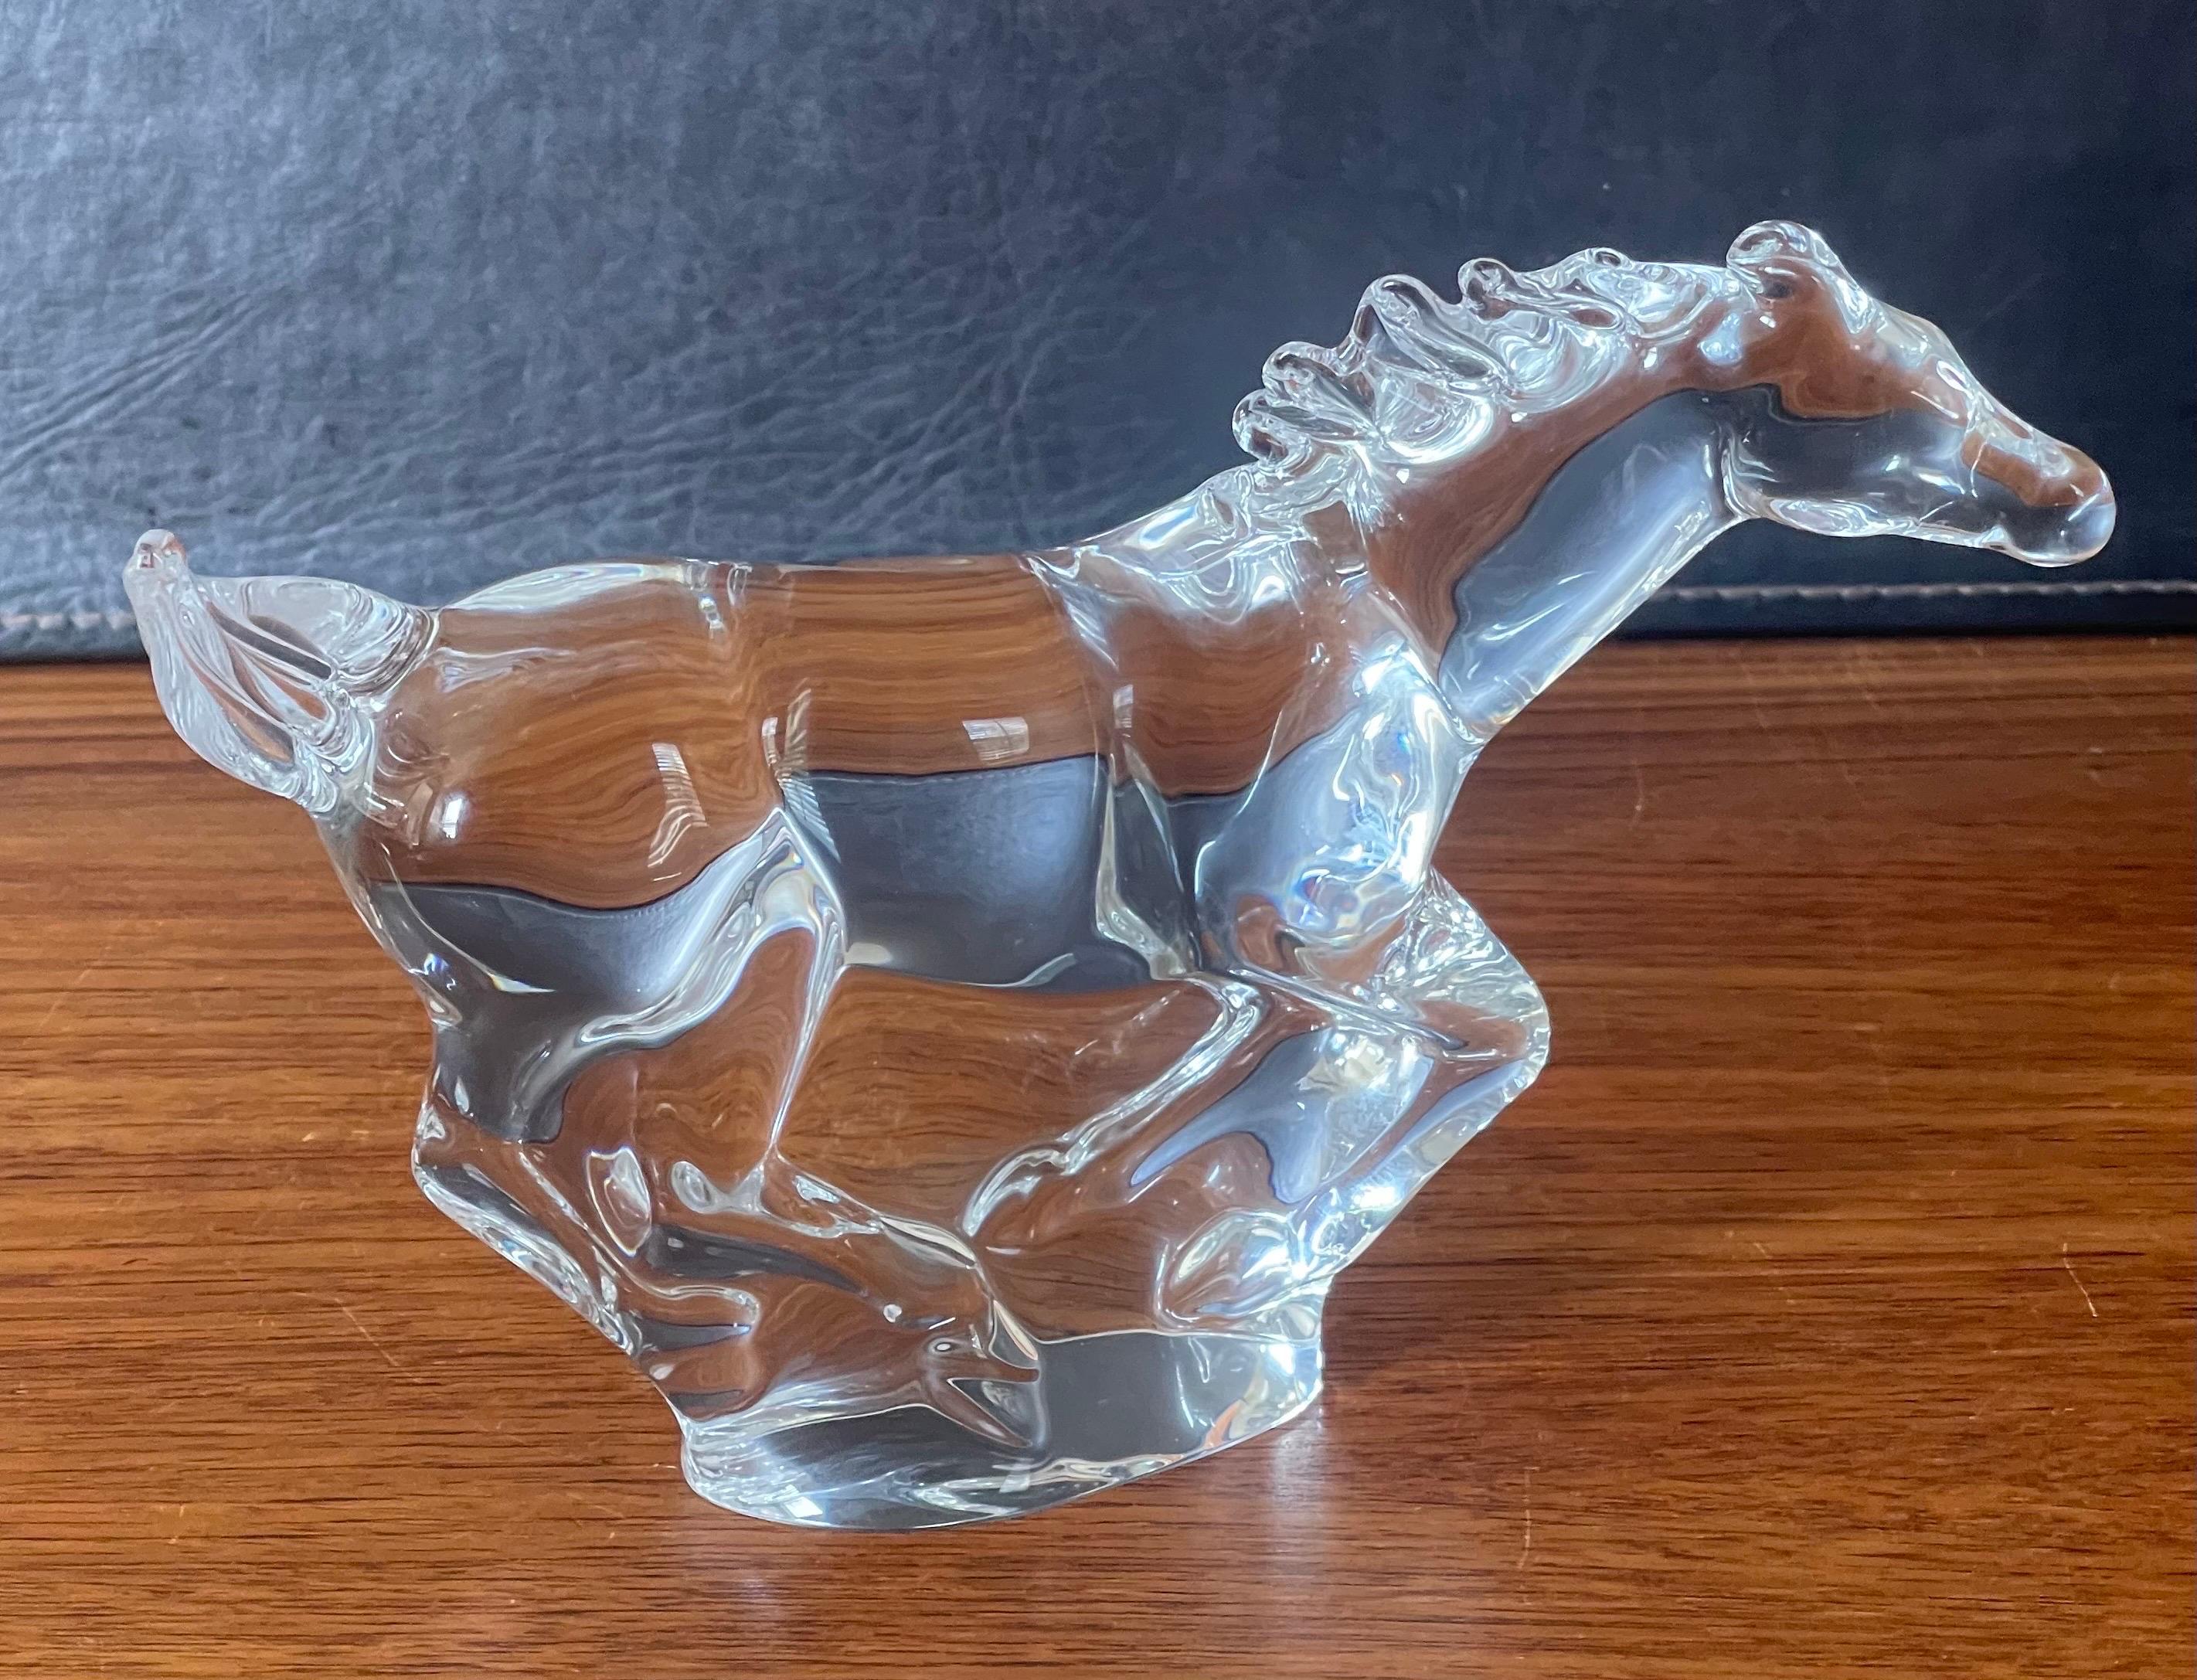 A rare crystal galloping horse / mustang sculpture by Steuben Glassworks, circa 1990s. The sculpture is in very good condition with no chips or cracks and measure 9.25